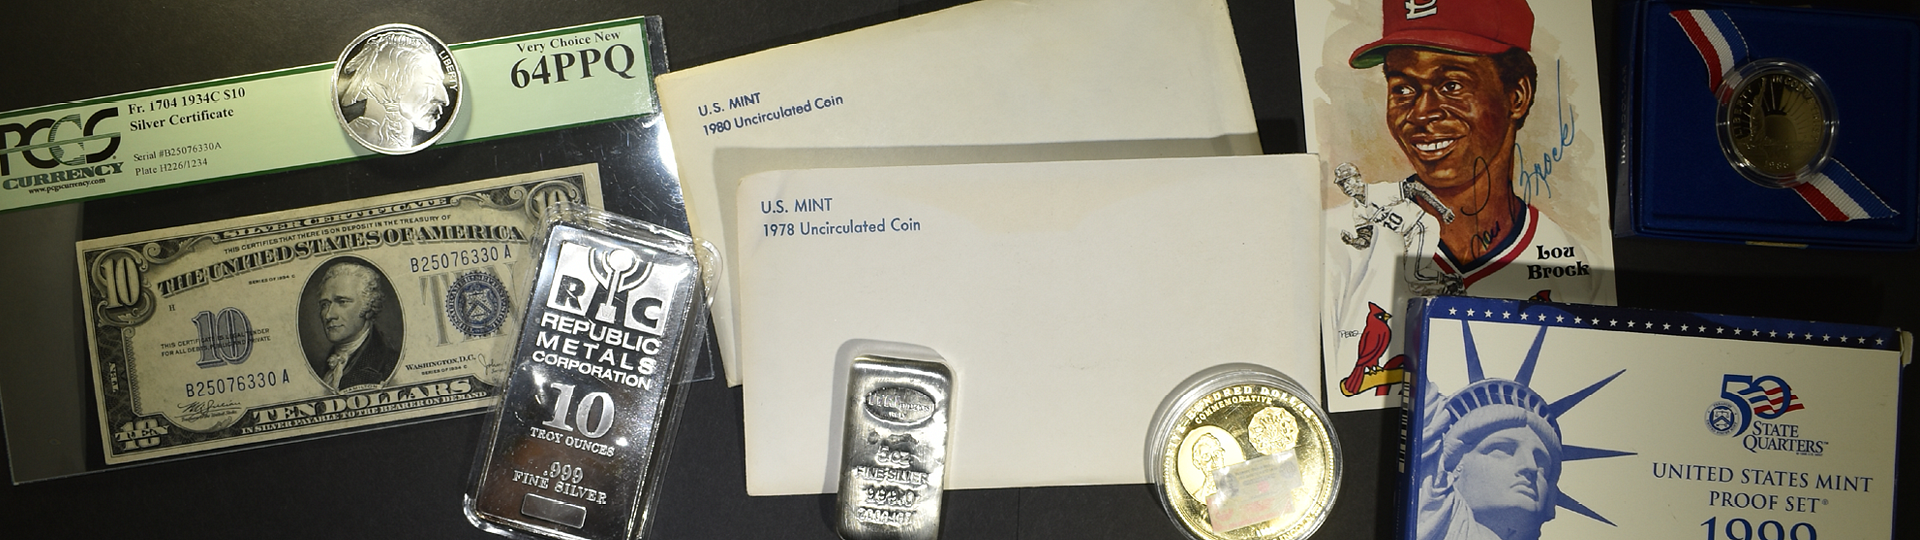 February 27th Silver City Rare Coins & Currency by Silver City Auctions